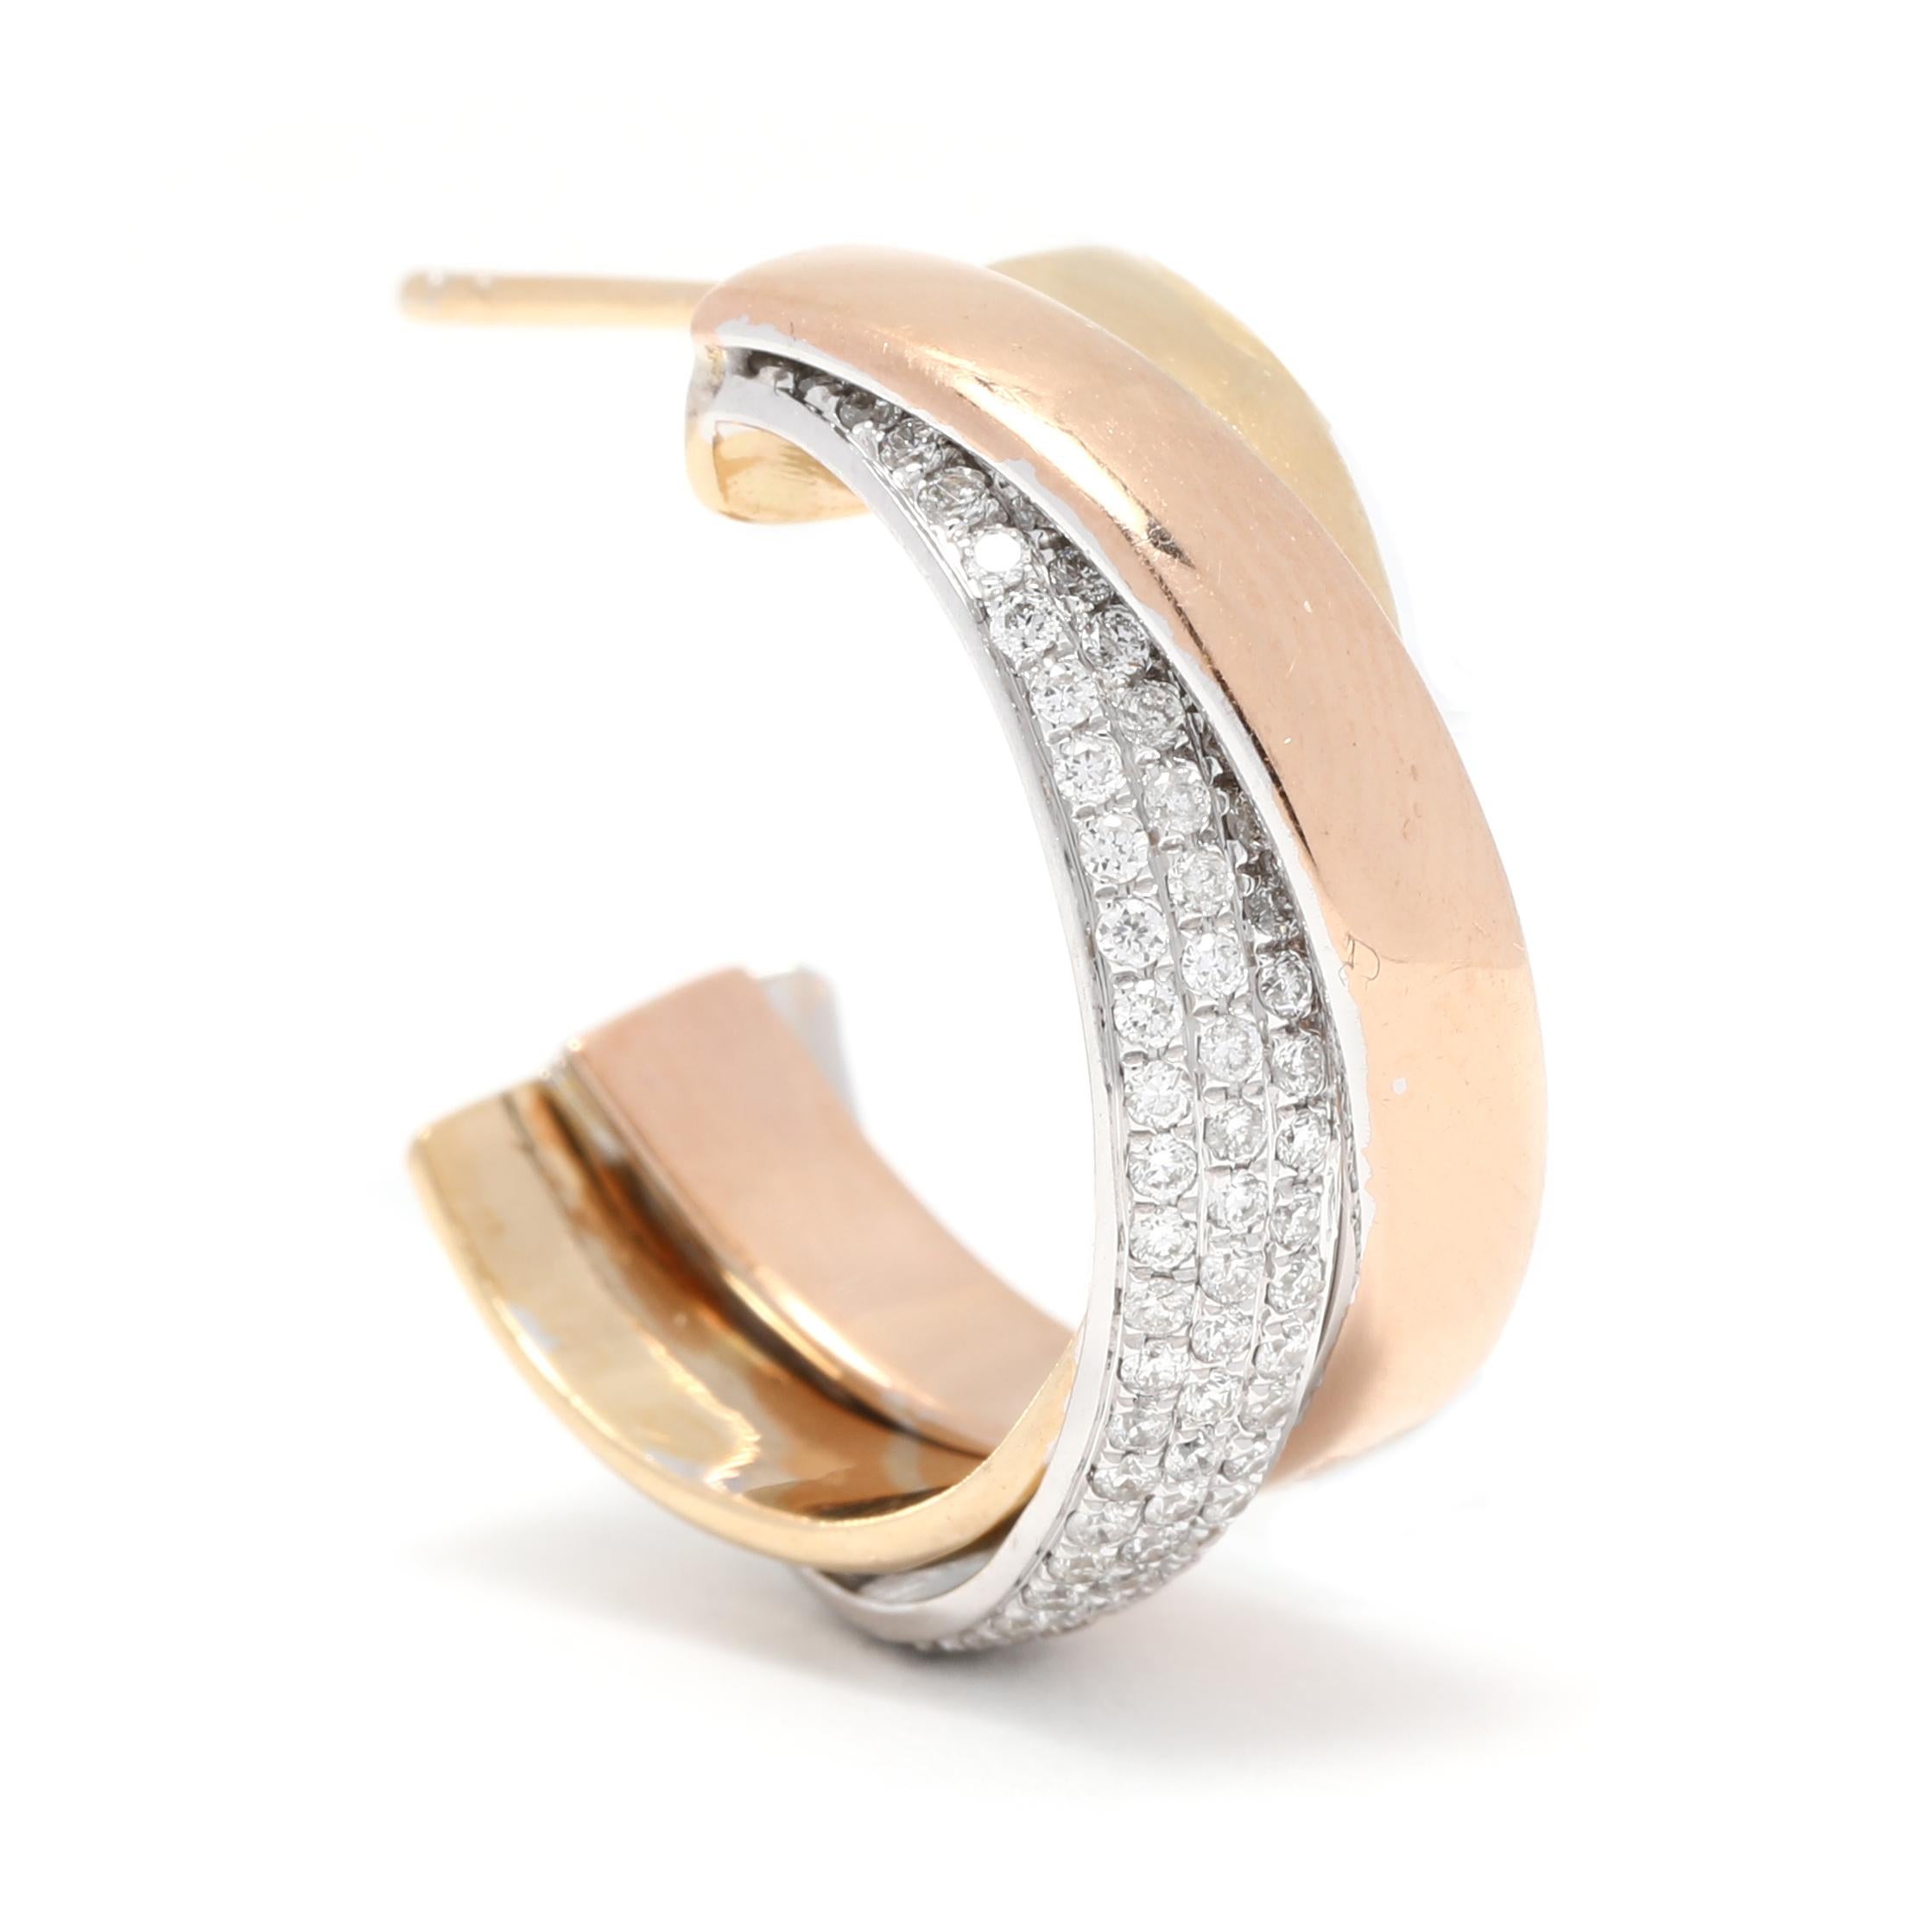 These gorgeous tri-color diamond hoop earrings are perfect for any special occasion. Crafted in 18K yellow, rose, and white gold, they feature a total of 1 carat of pavé diamonds in a unique crossover design. The length of the earrings is 7/8 inch